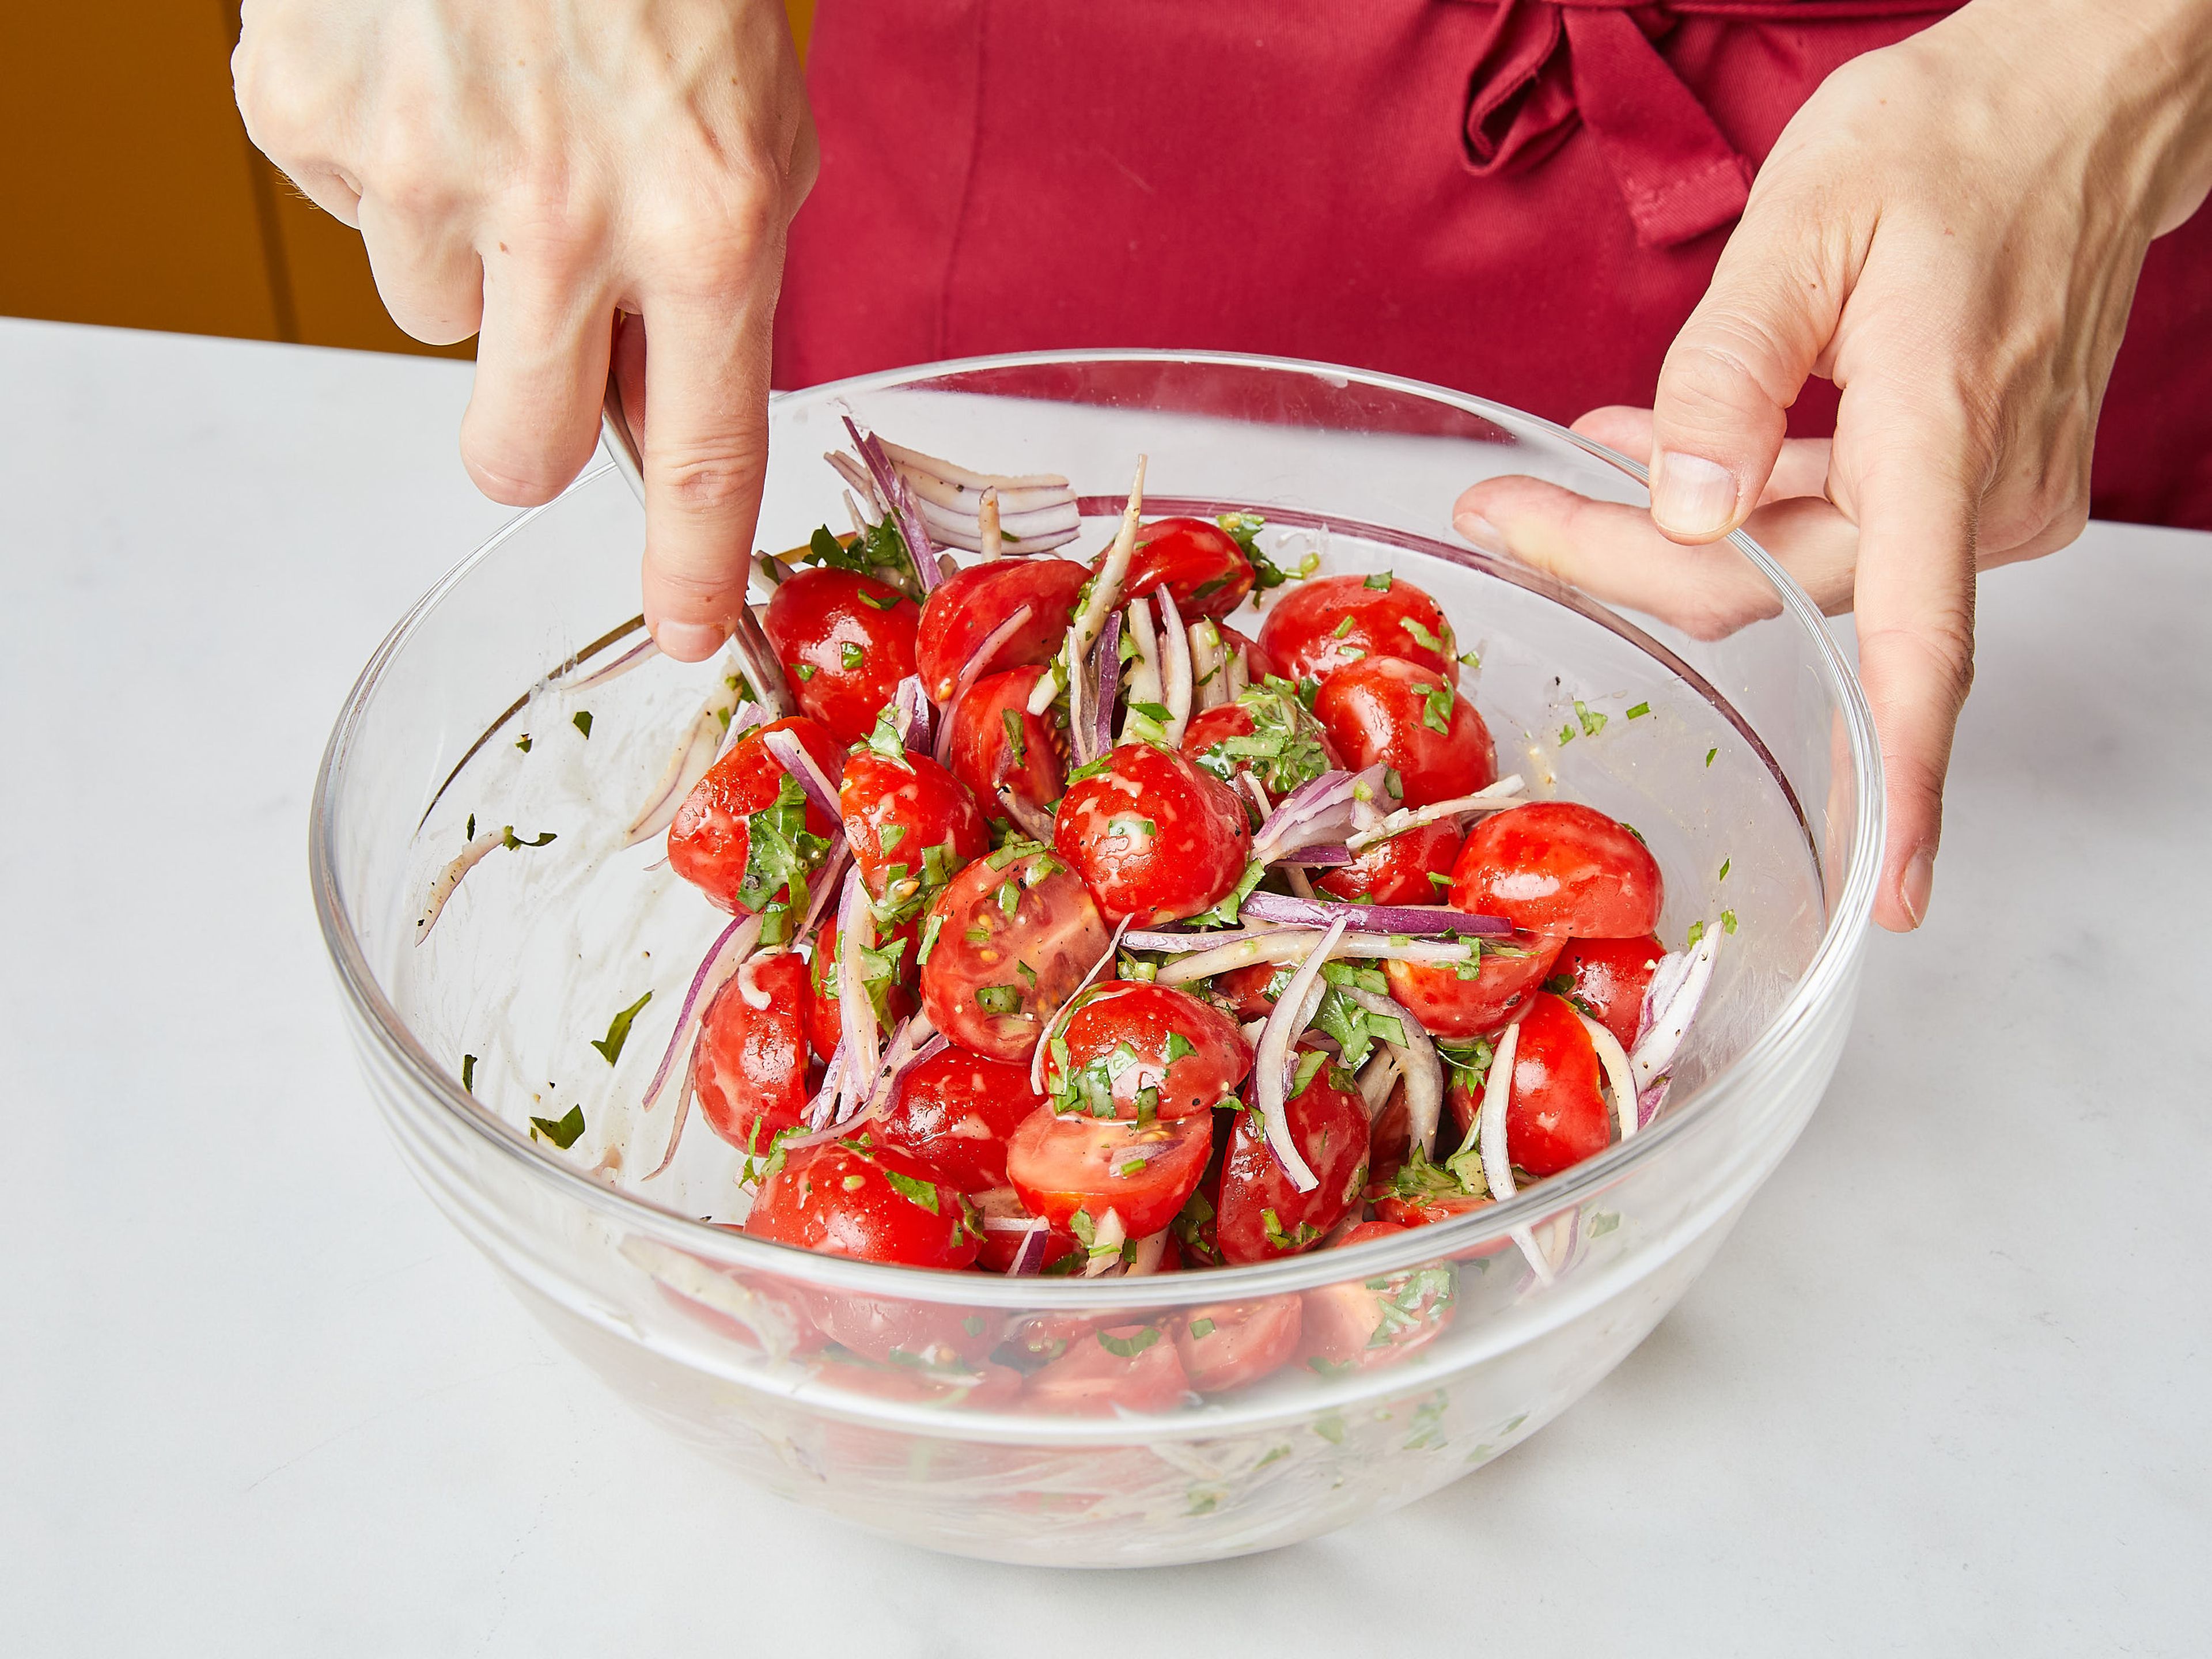 Toss half of the dressing with the tomatoes and onion mix, add to the platter on top of the lettuce.